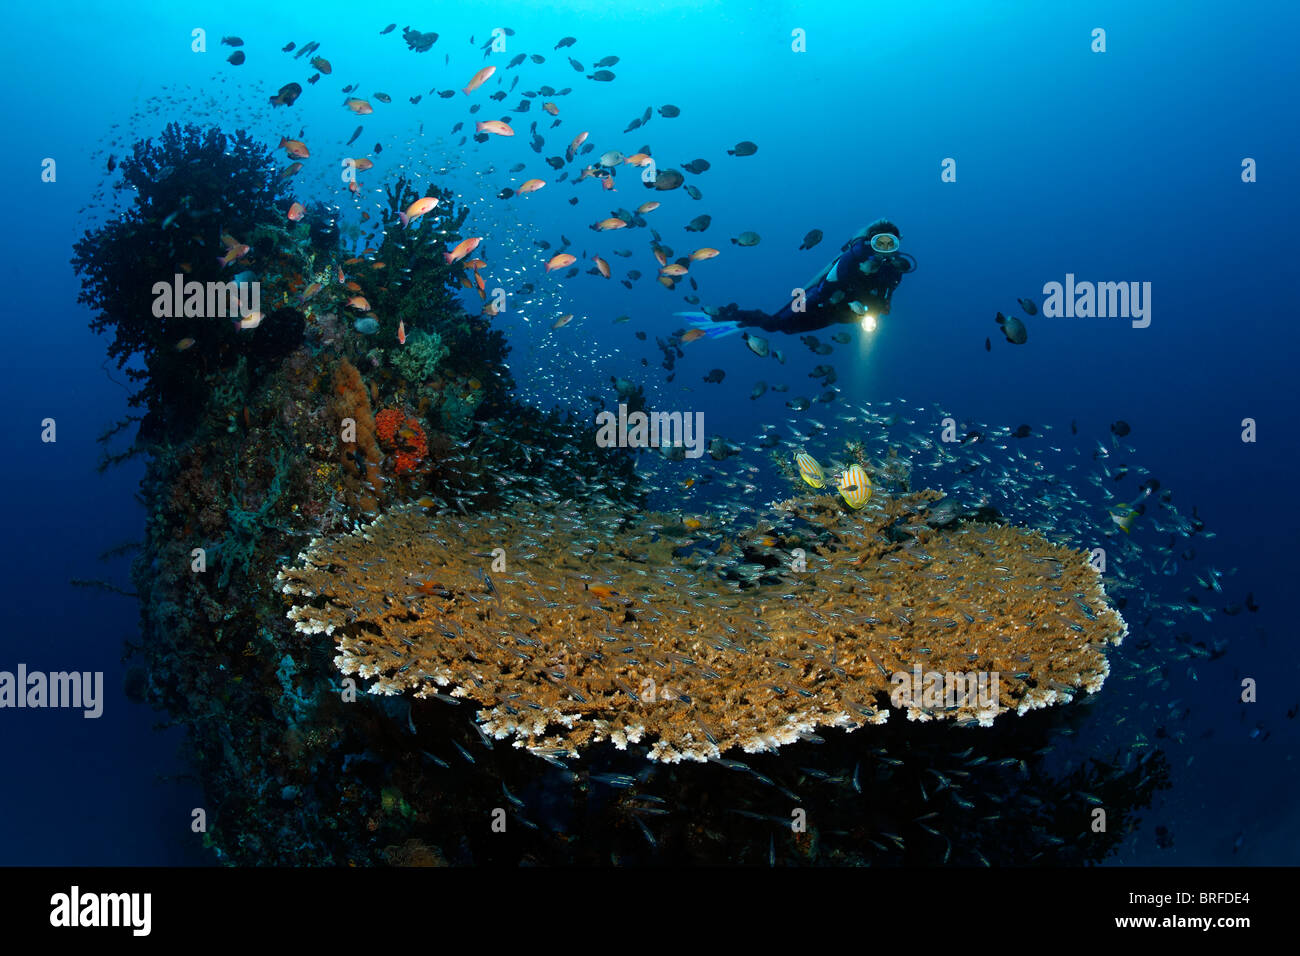 Reeftop with a large Table Coral (Acropora sp.), variety of reef fishes, scuba diver, Gangga Island, Bangka Islands Stock Photo